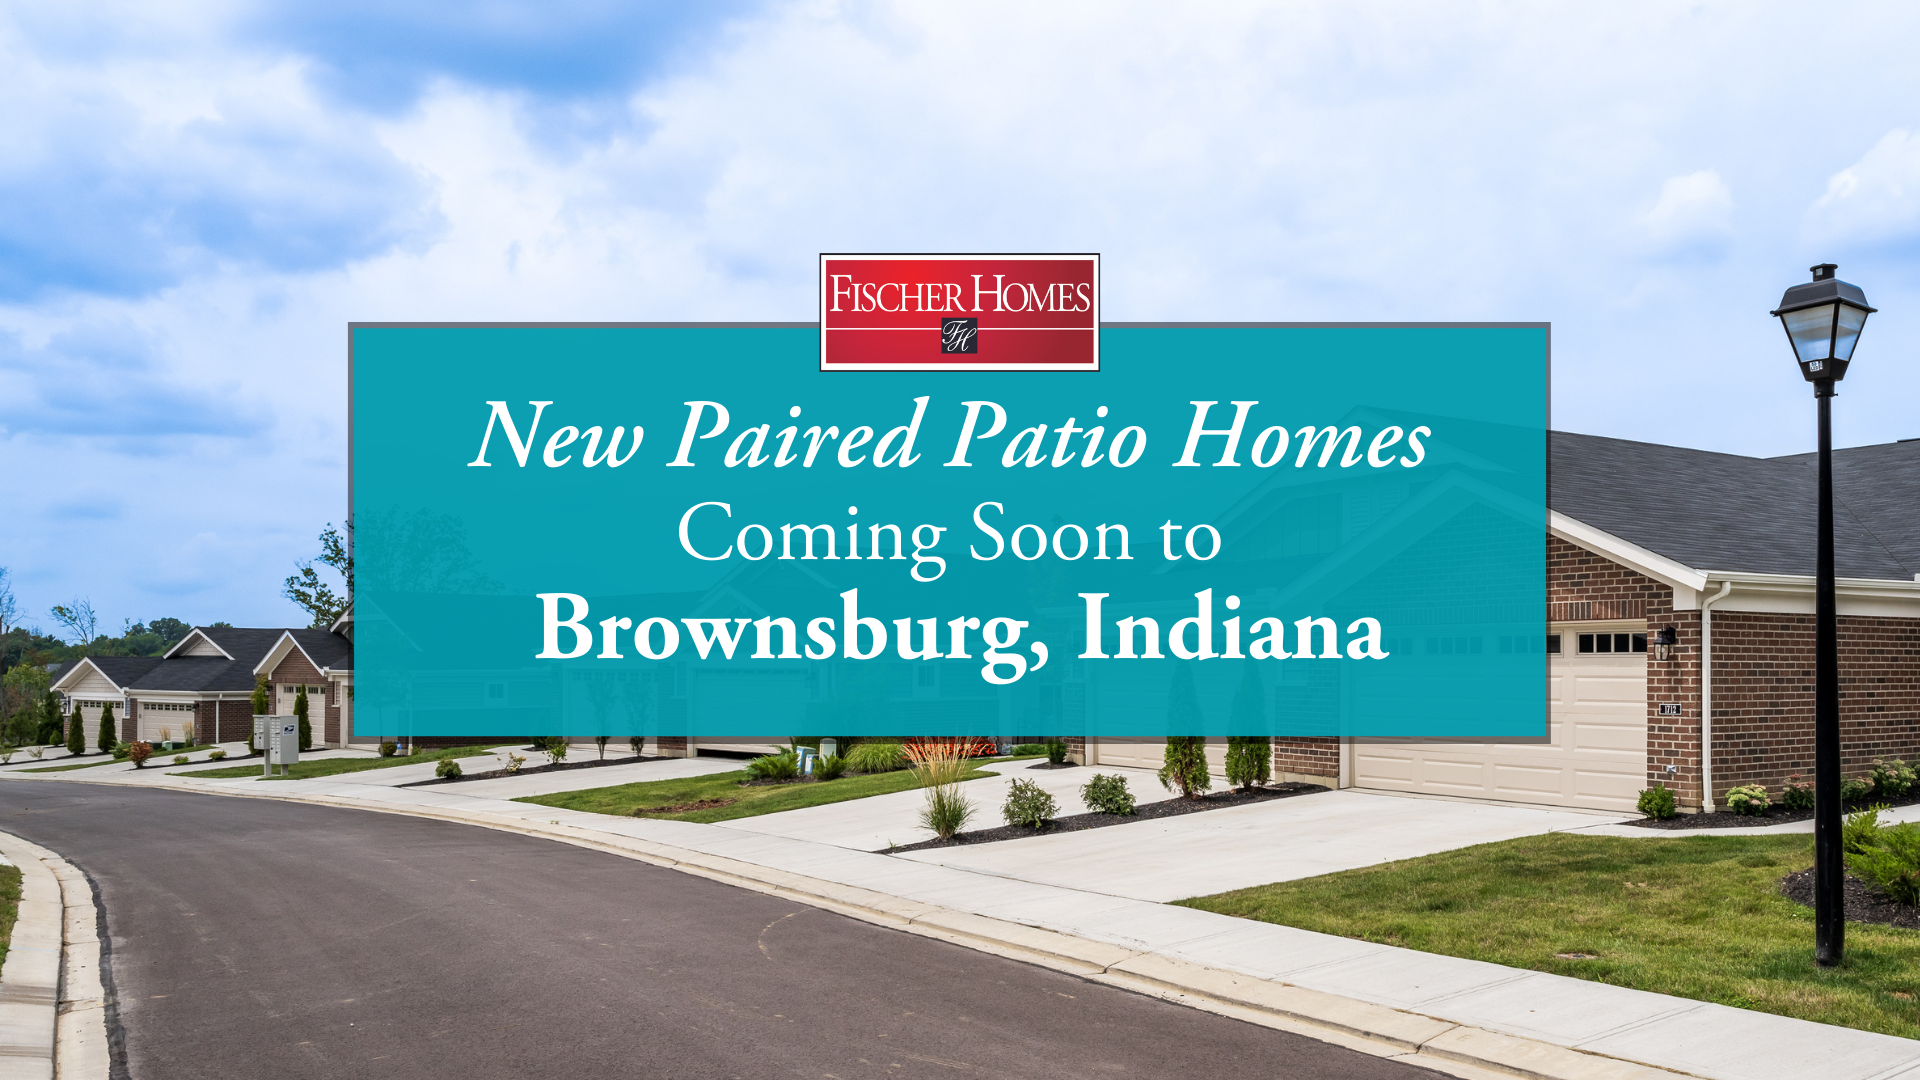 New Paired Patio Homes Coming Soon to Brownsburg, Indiana